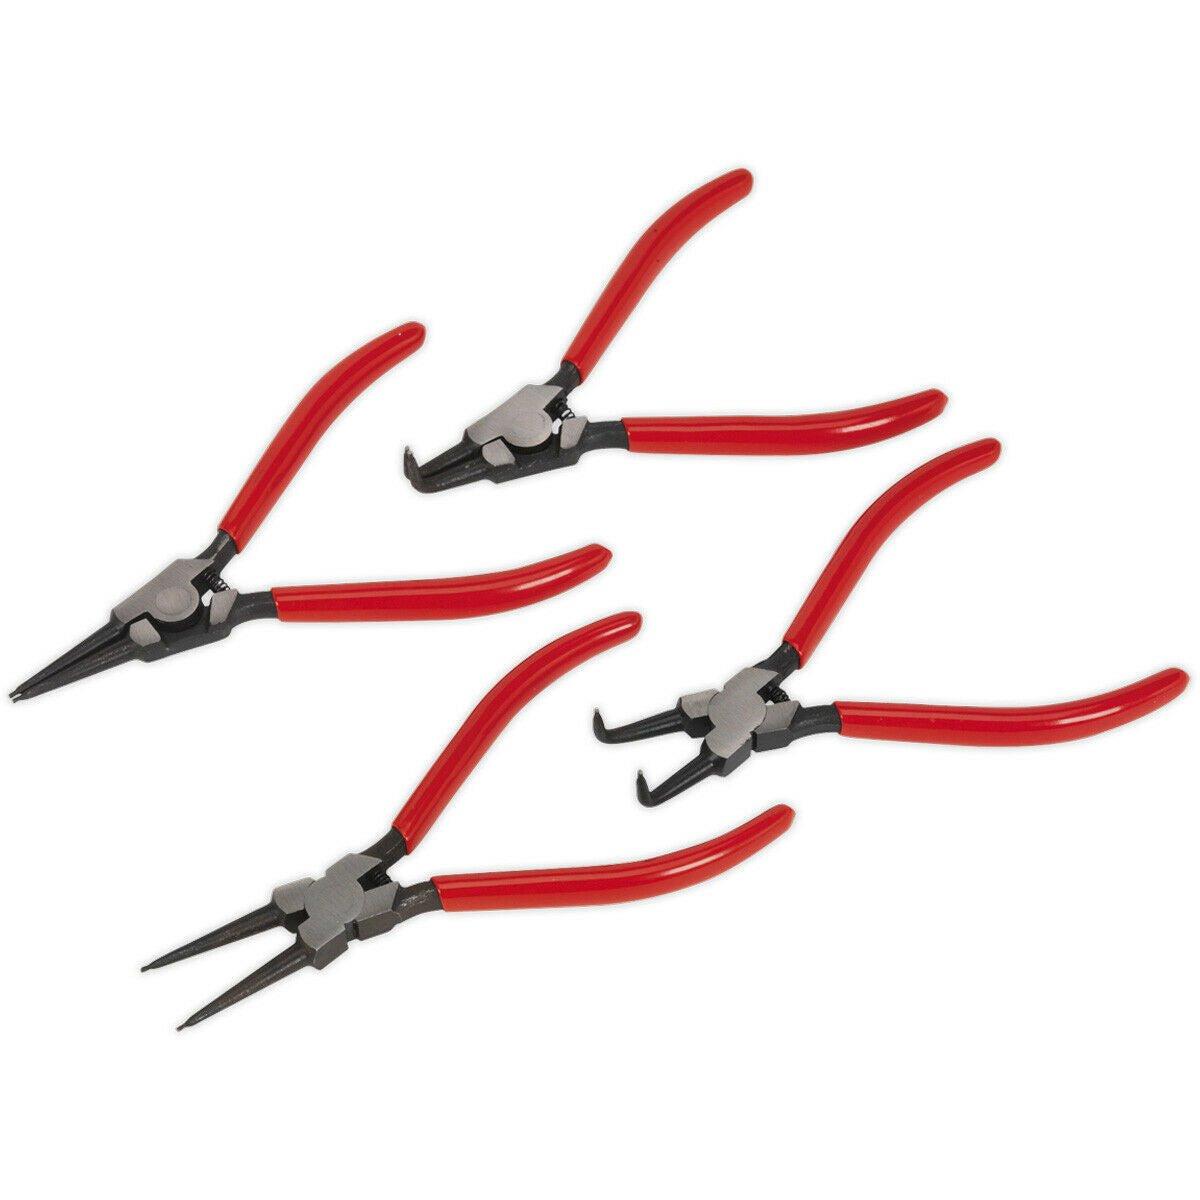 4 Piece 180mm Circlip Pliers Set - Hardened - Spring Loaded Jaws - Non Slip Tips